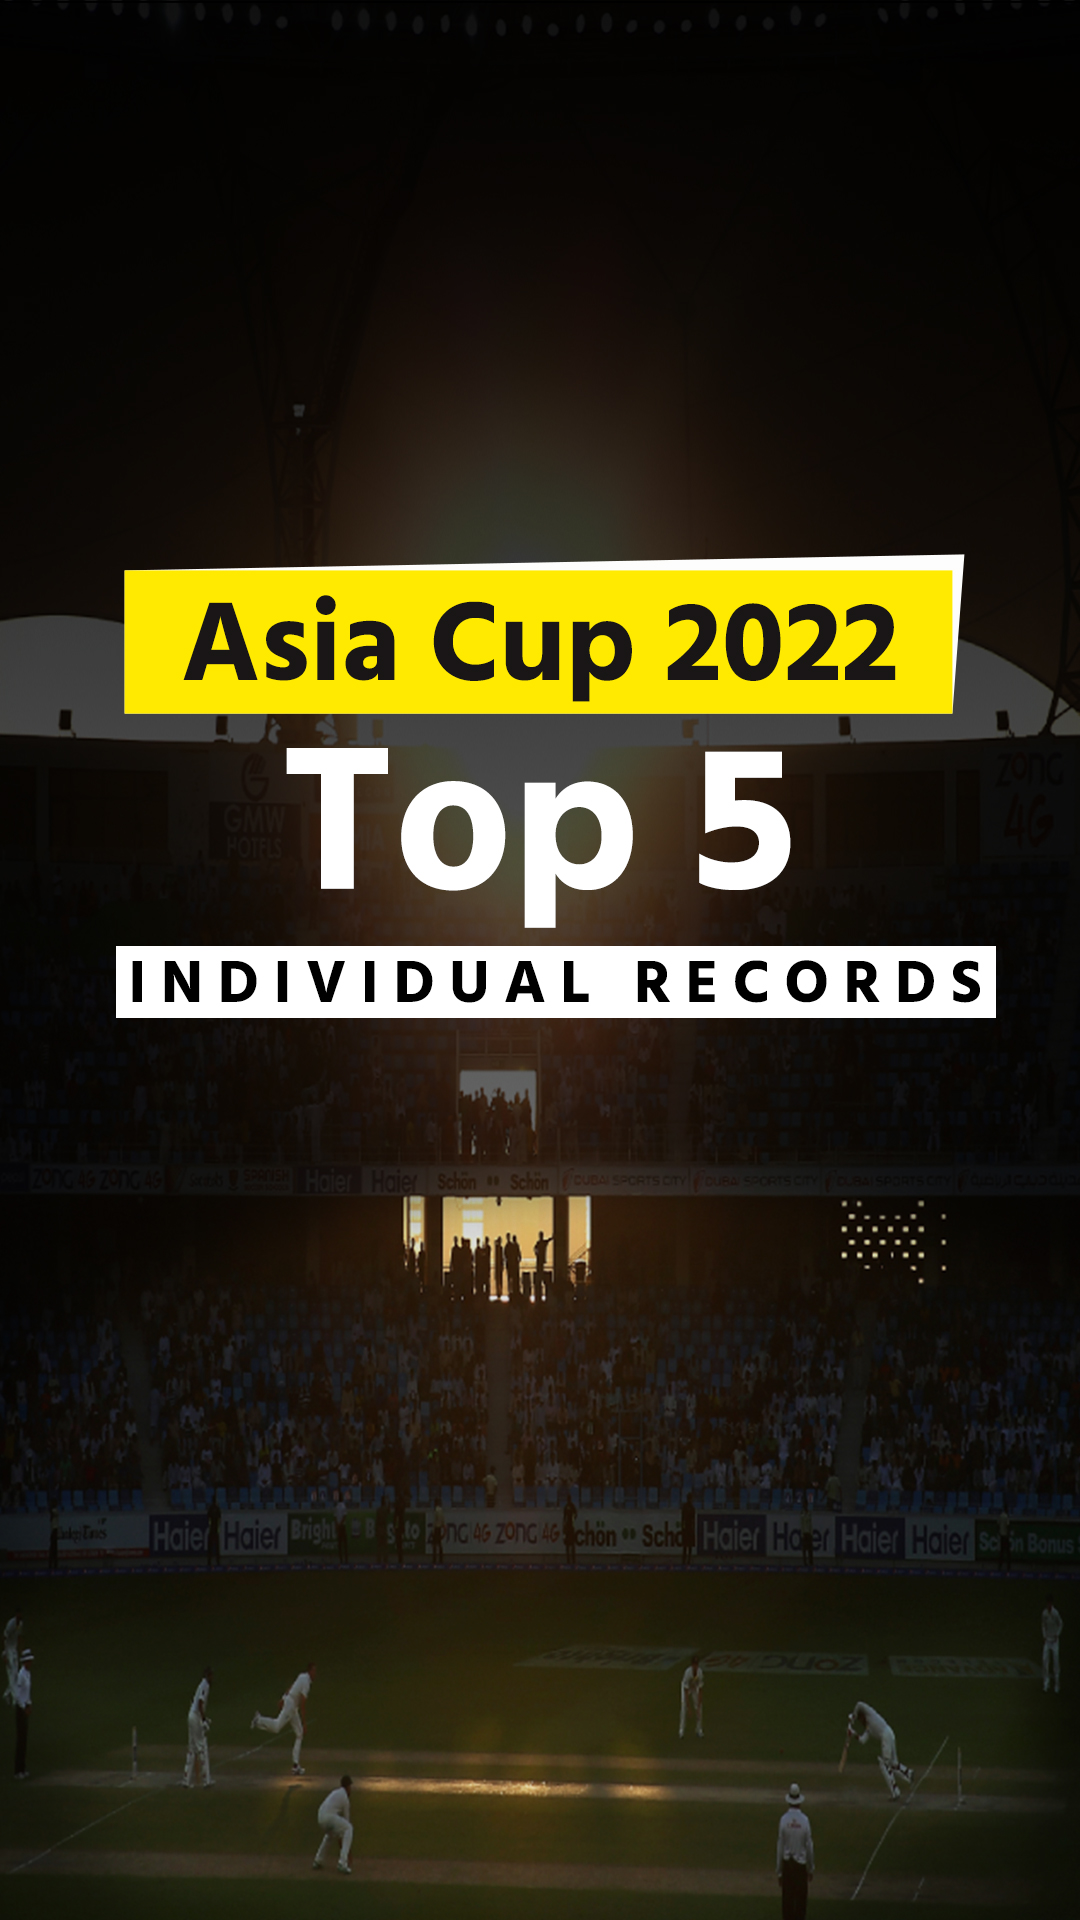 Top 5 Individual records in Asia Cup